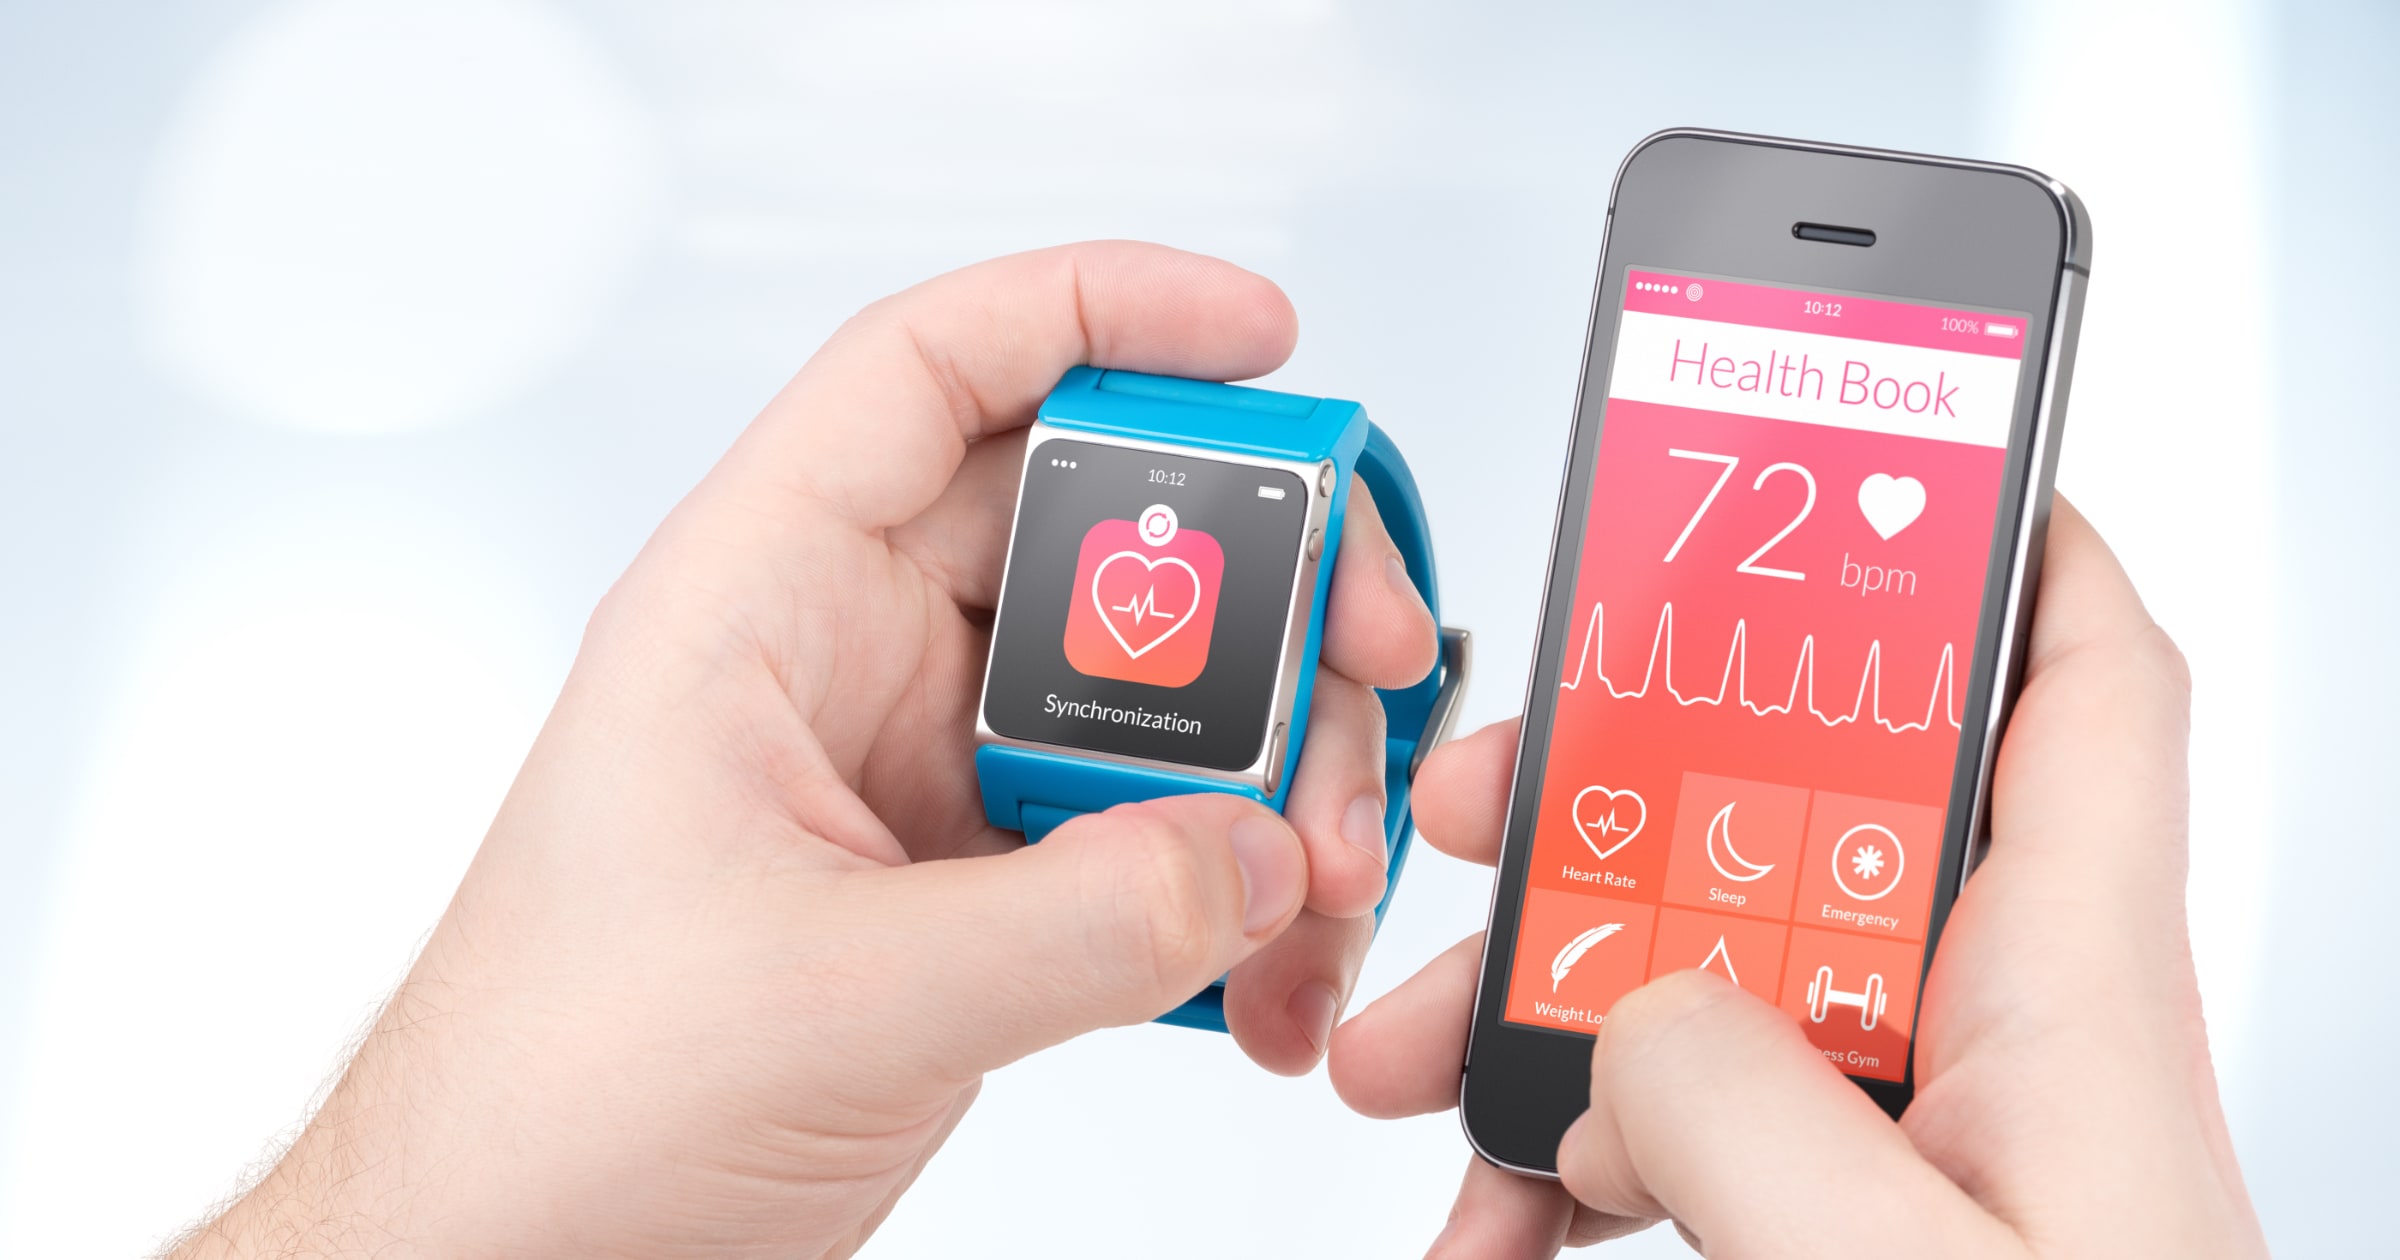 health app on generic smartphone and smartwatch